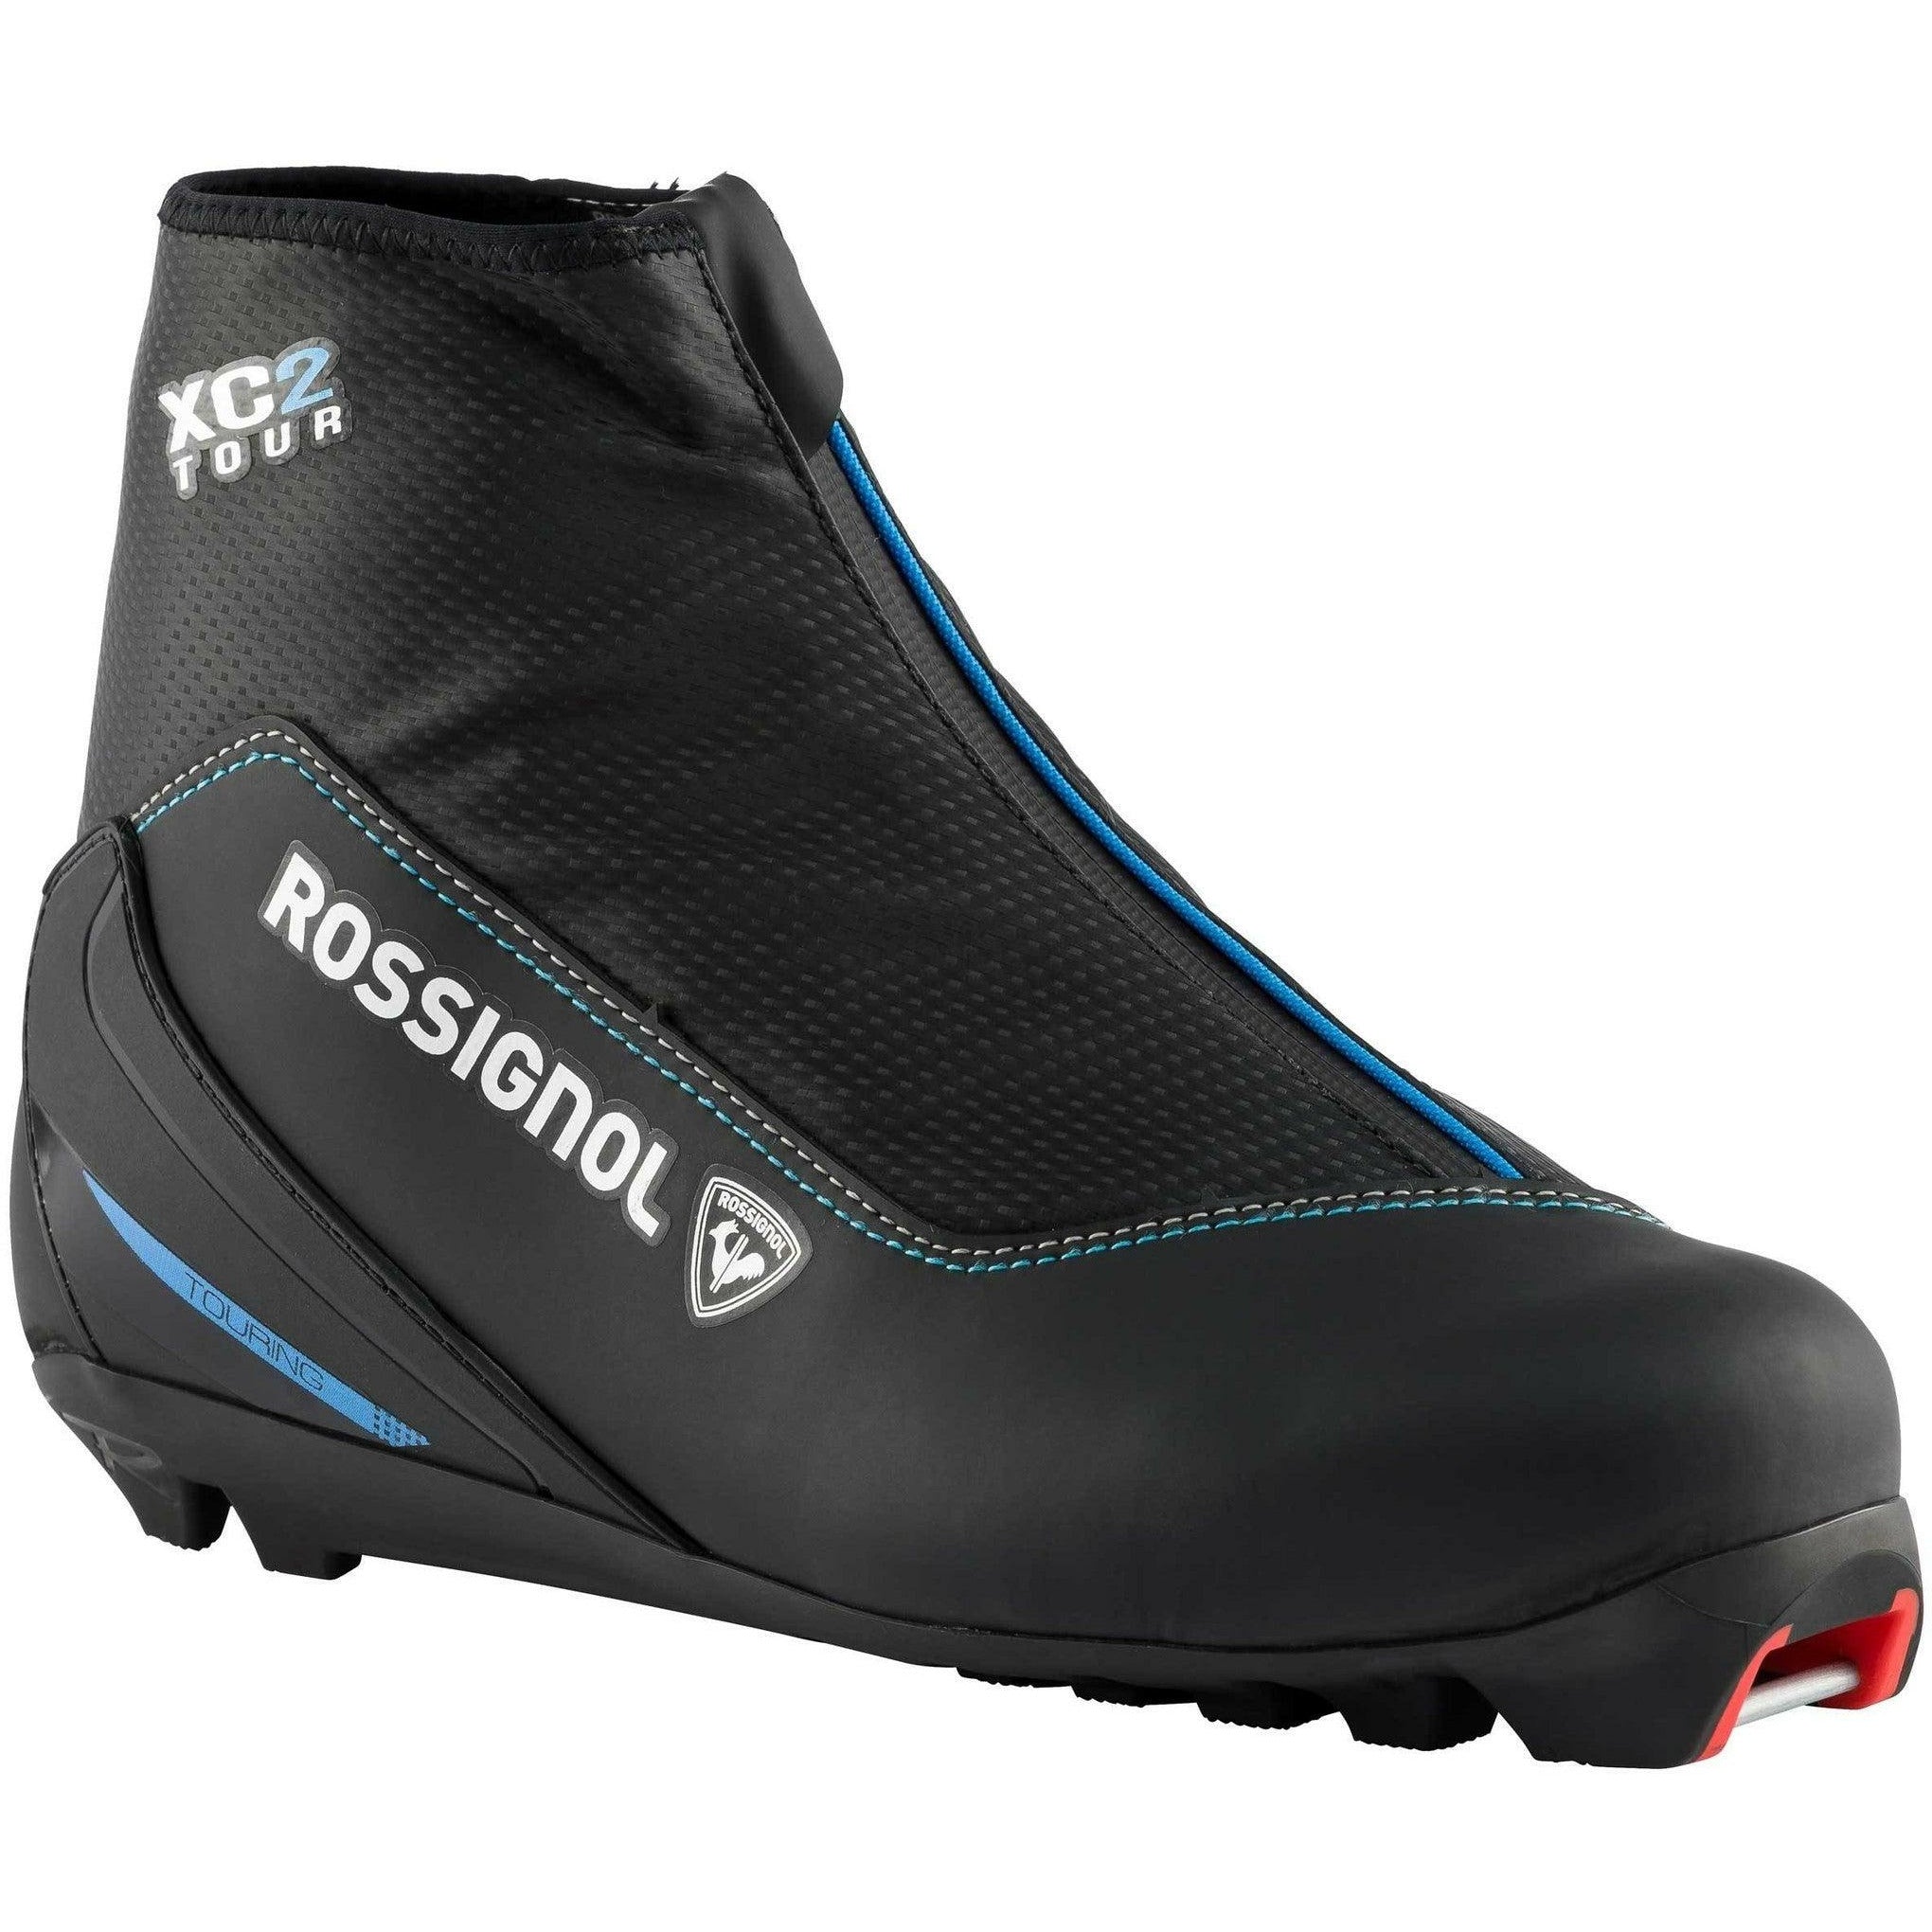 Rossignol XC-2 FW - Pioneer Midwest